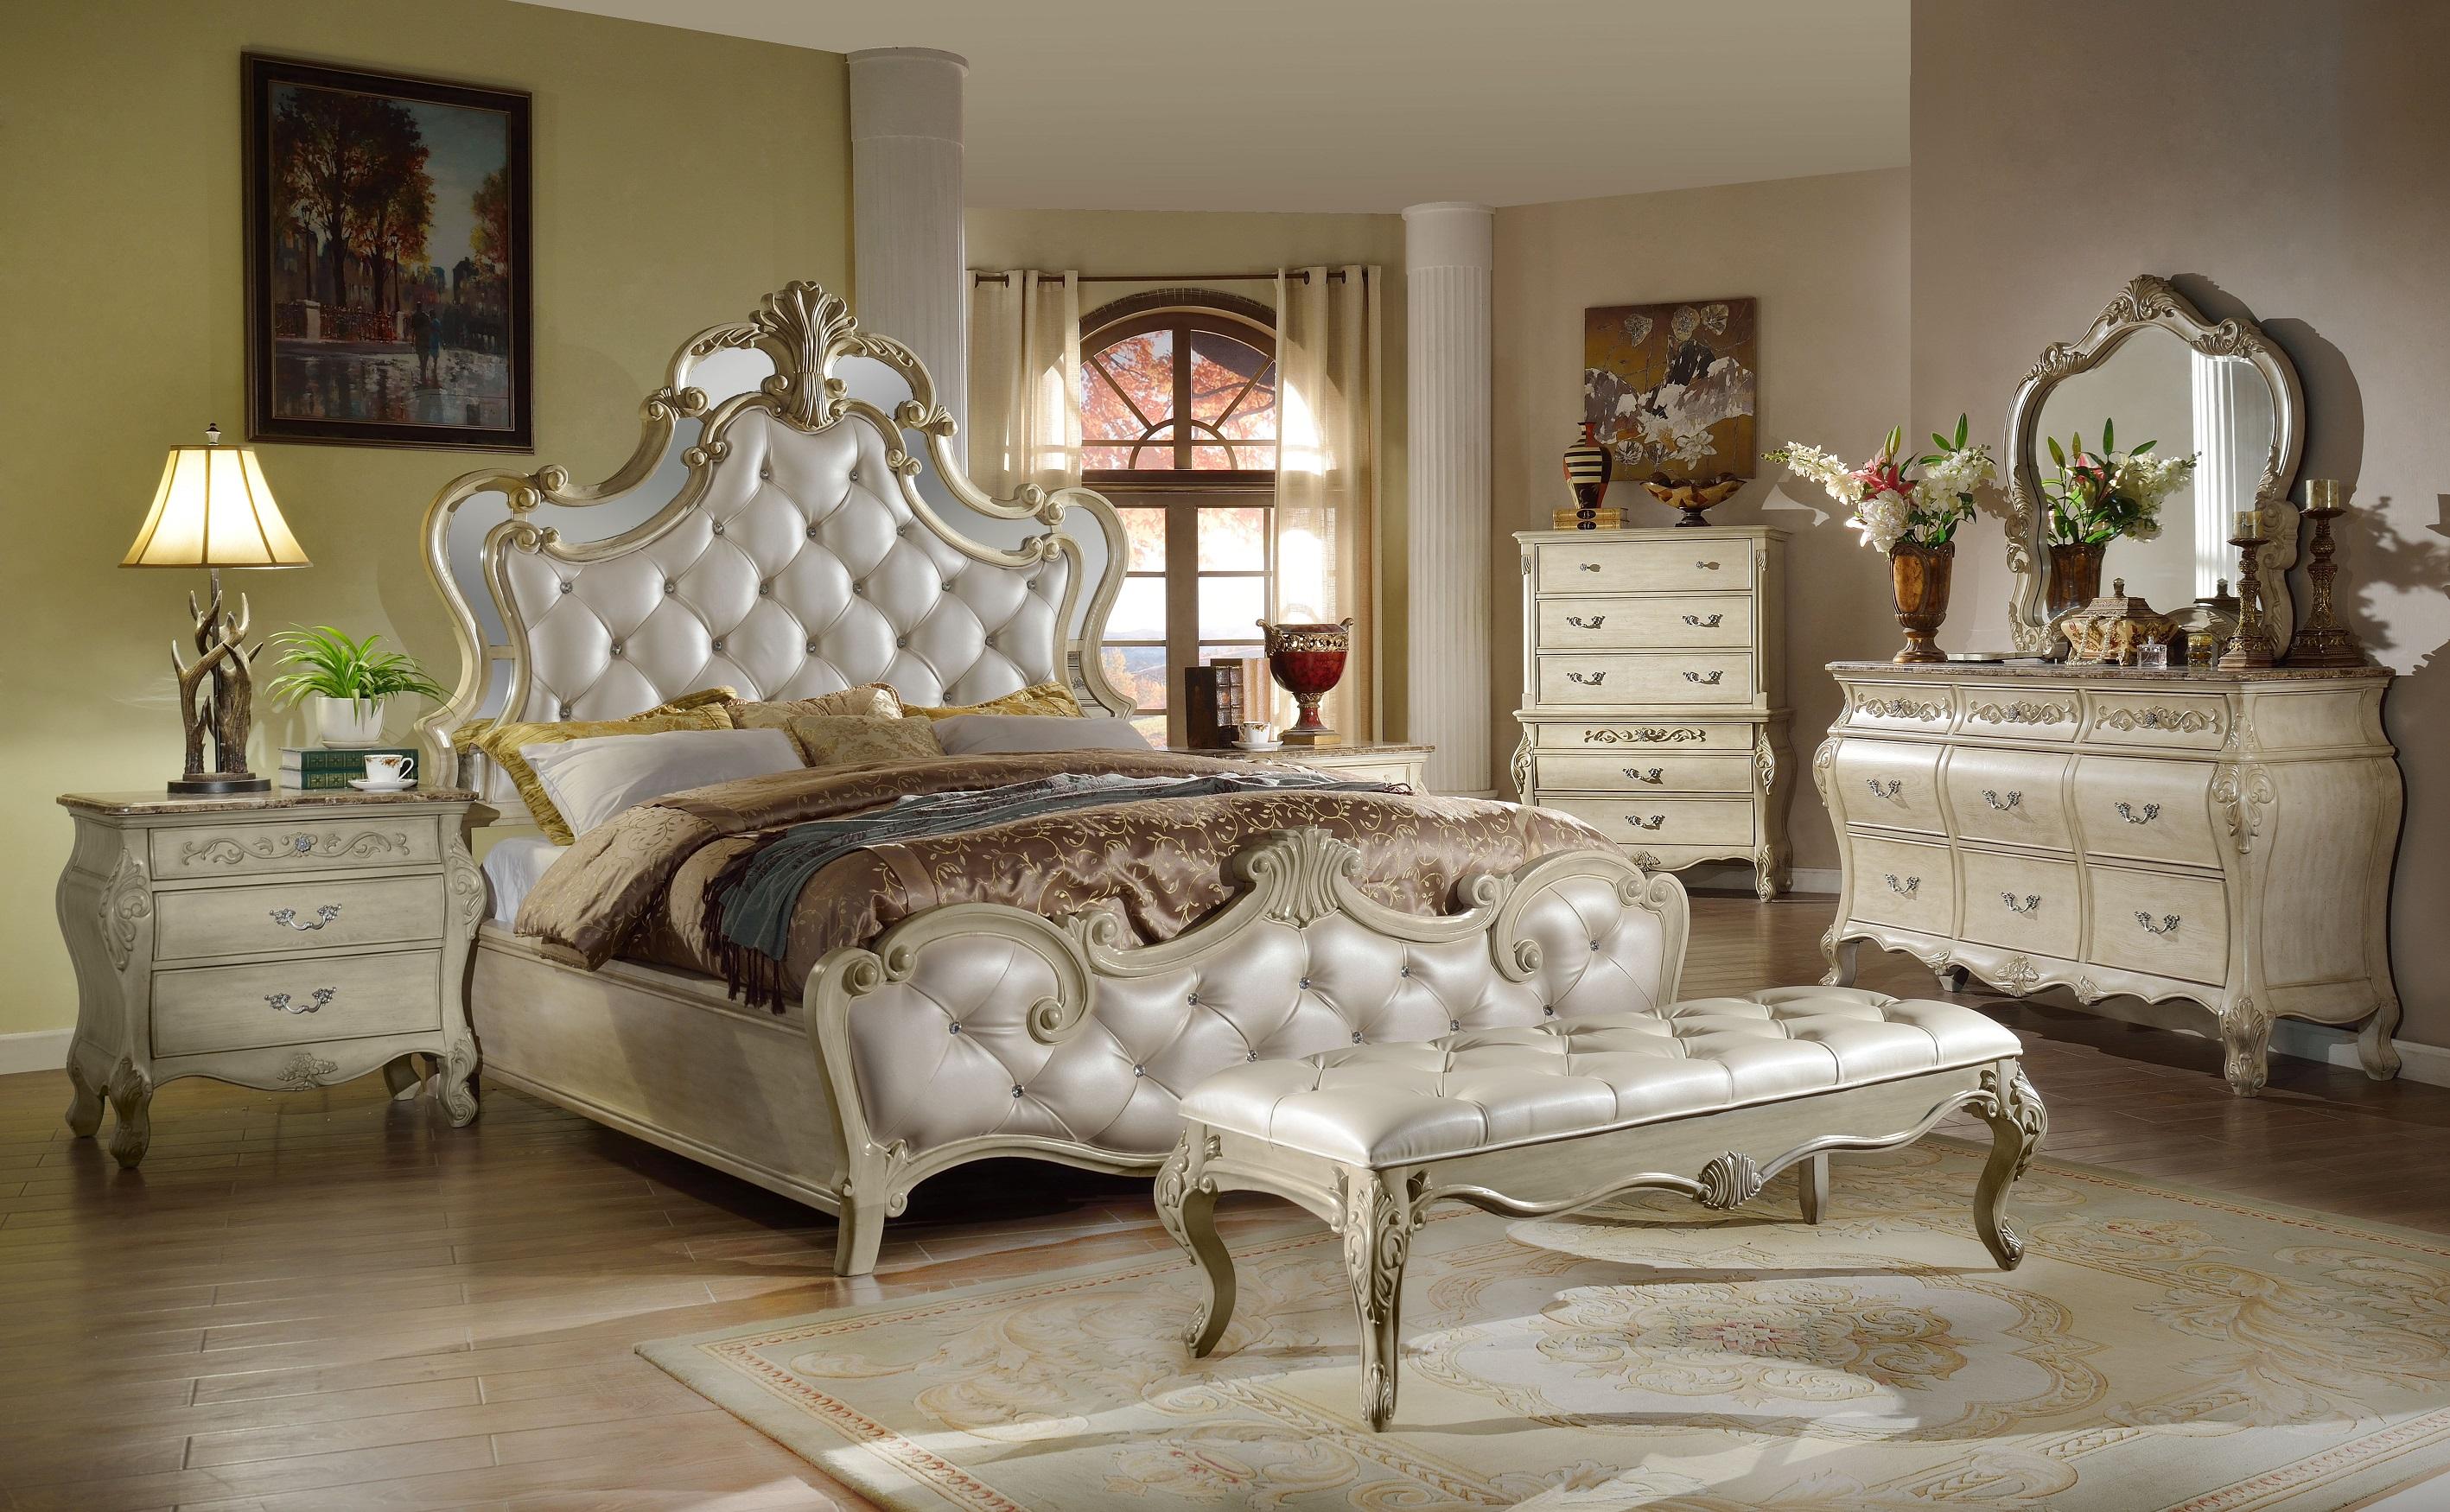 

    
McFerran B8305 Antique White Glamour Tufted Fabric Queen Bedroom Set 4Pcs
